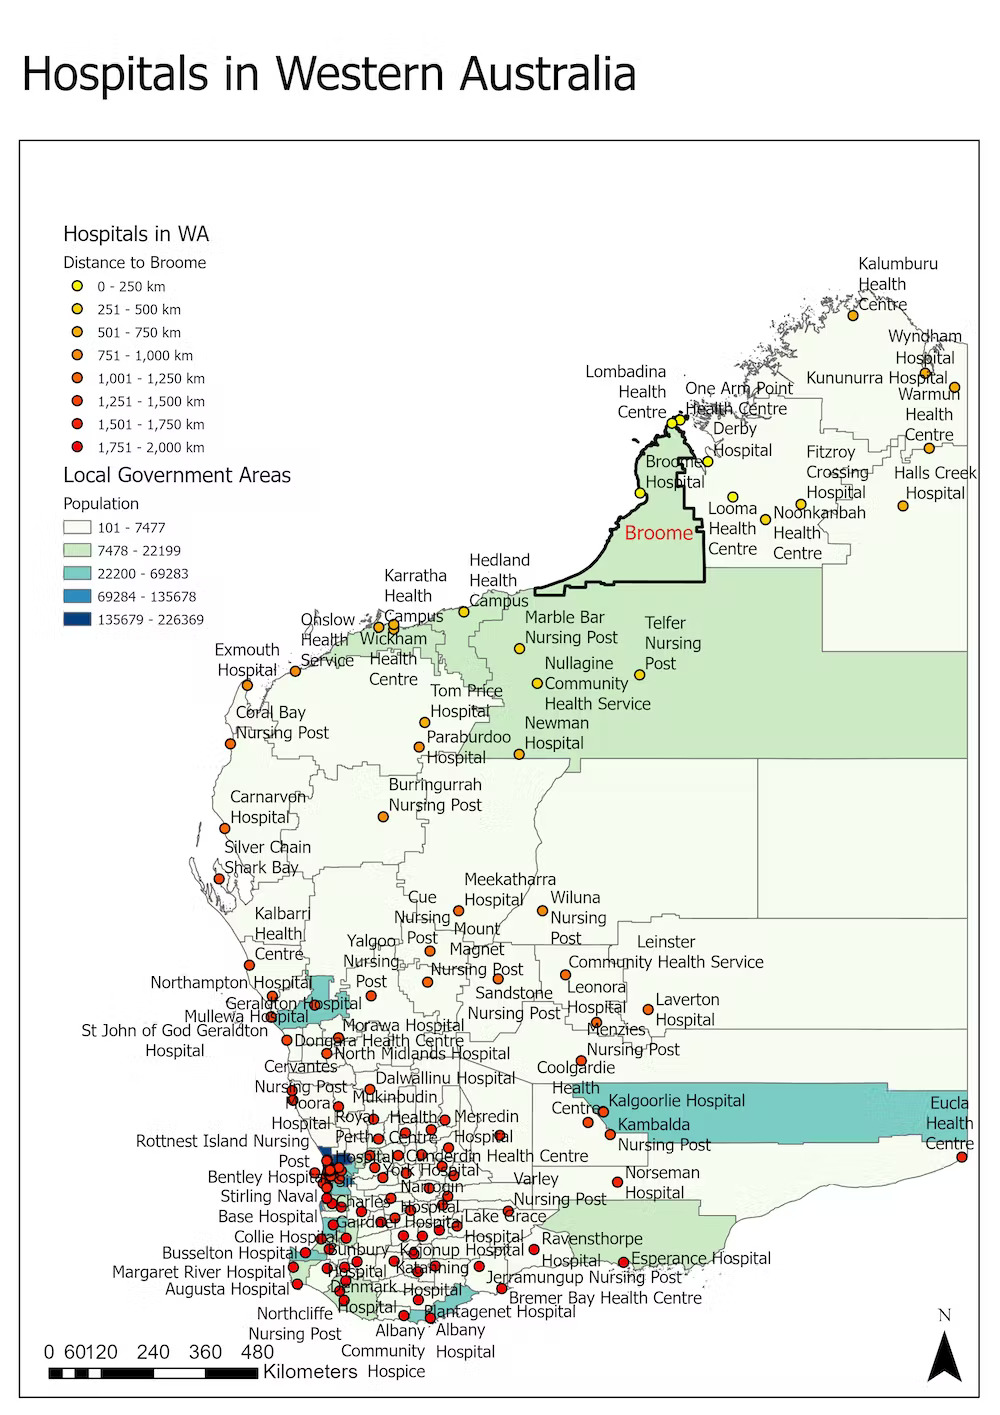 Hospital in Western Australia on a map. Most major hospitals are near Perth, which is about 2,000 kilometres from Broome. 